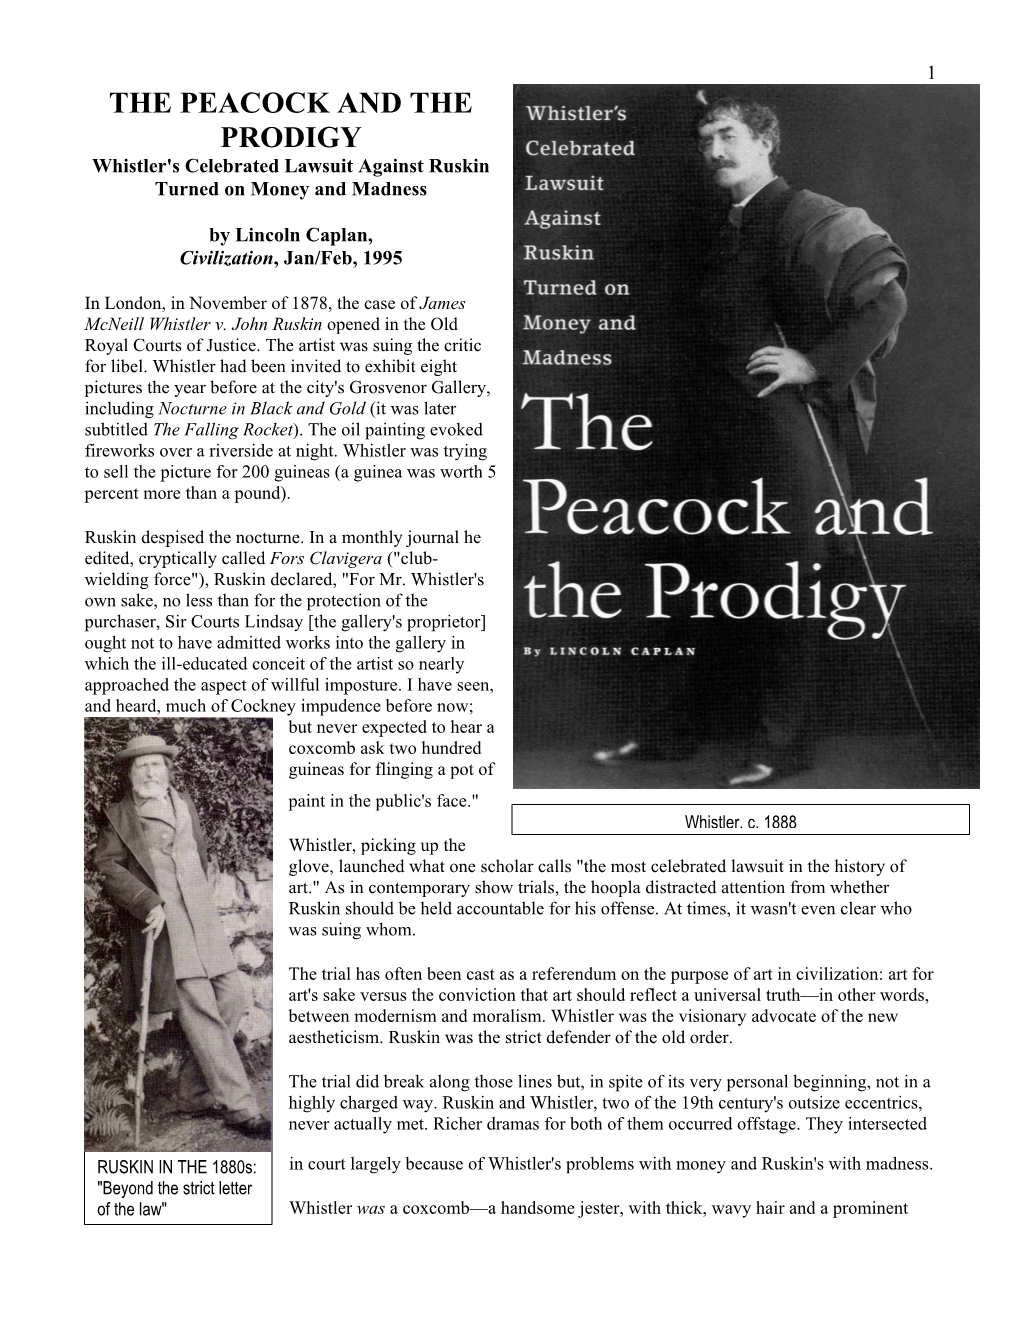 THE PEACOCK and the PRODIGY Whistler's Celebrated Lawsuit Against Ruskin Turned on Money and Madness